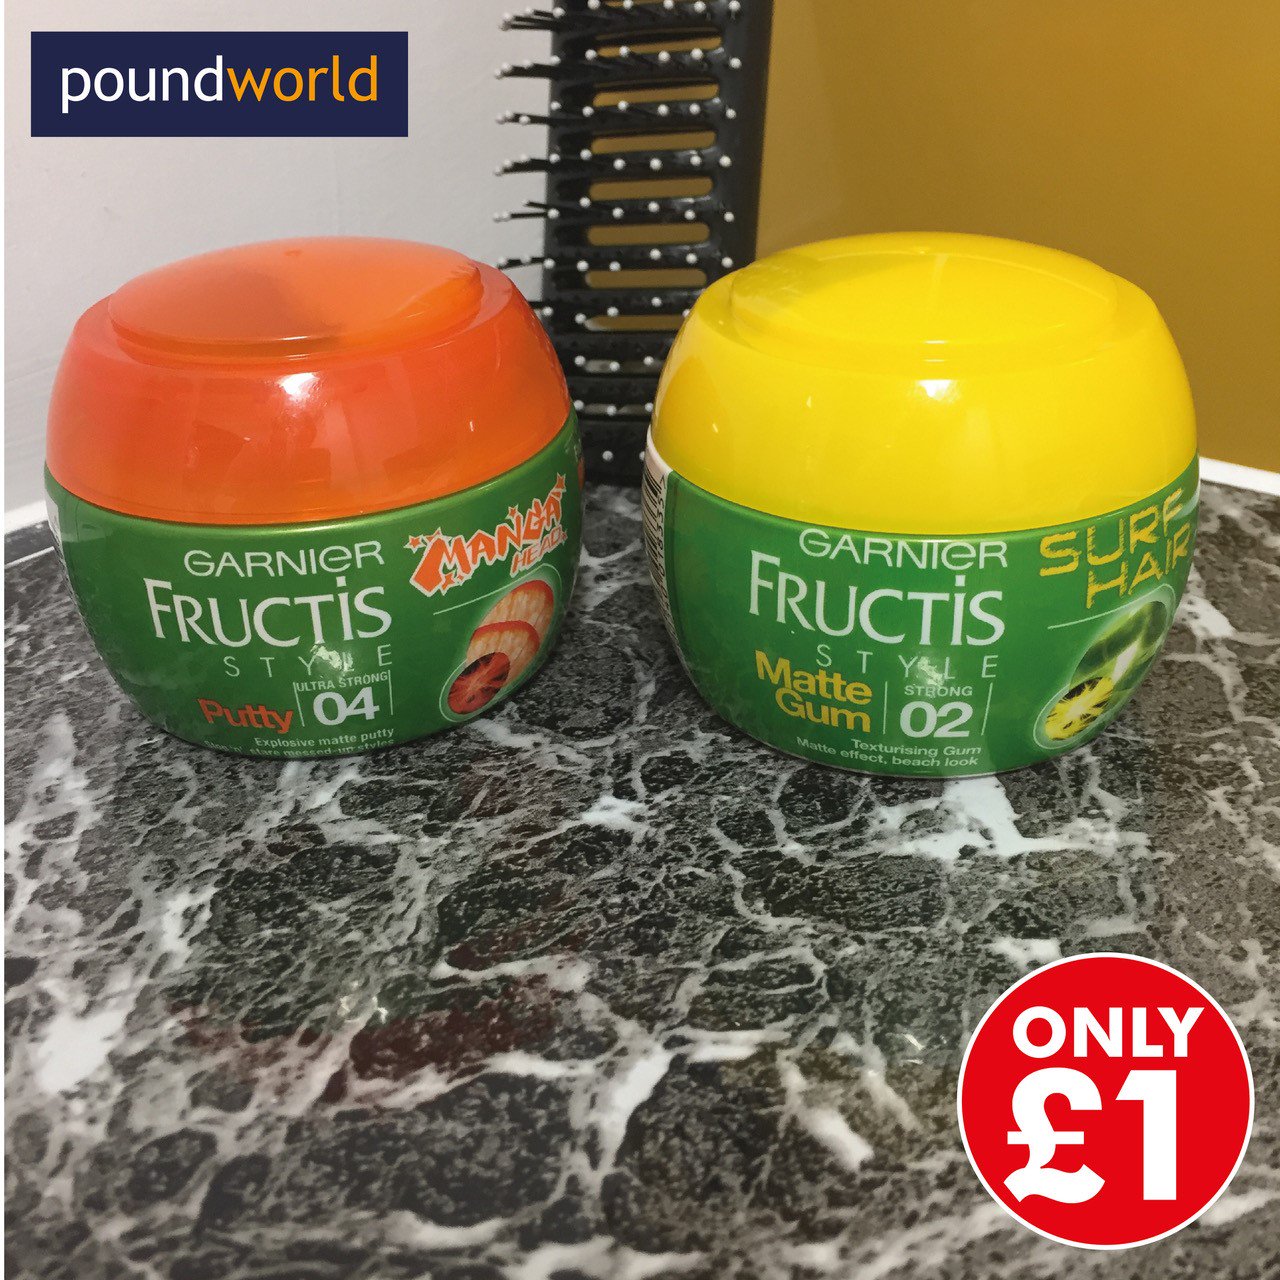 Naar de waarheid krans Zuidelijk Poundworld в Twitter: „Here's a deal - #Fructis Style Putty (Manga Head)  and Matte Gum (Surf Hair) for ONLY £1 - this is currently THREE TIMES the  price elsewhere. https://t.co/HMAbDZZt2i“ / Twitter